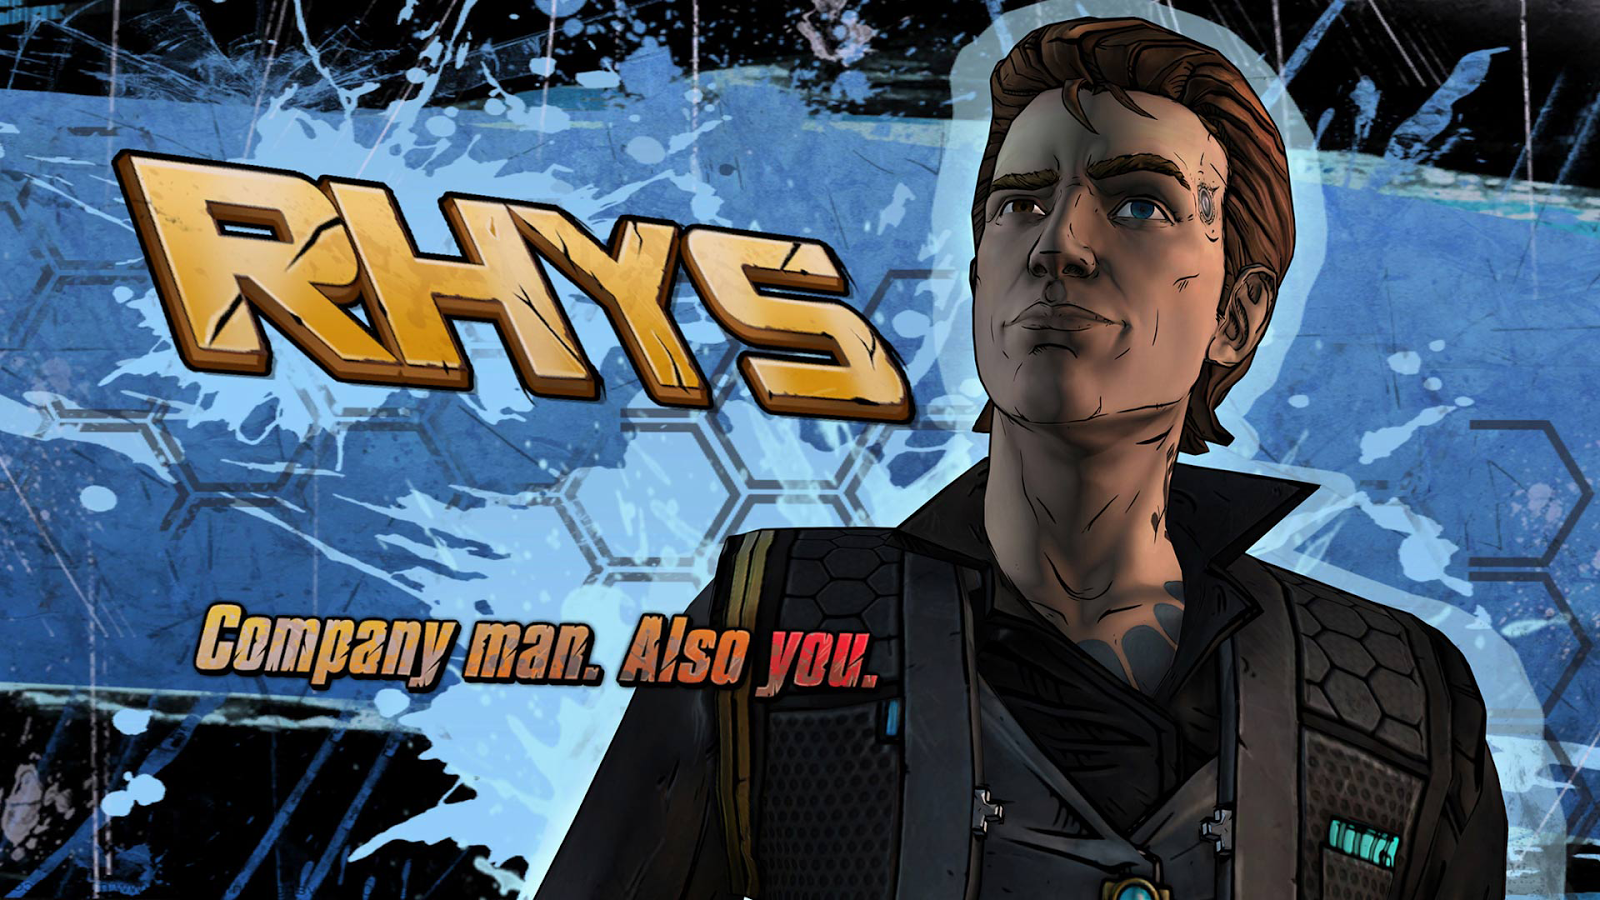 Tales From The Borderlands HD wallpapers, Desktop wallpaper - most viewed